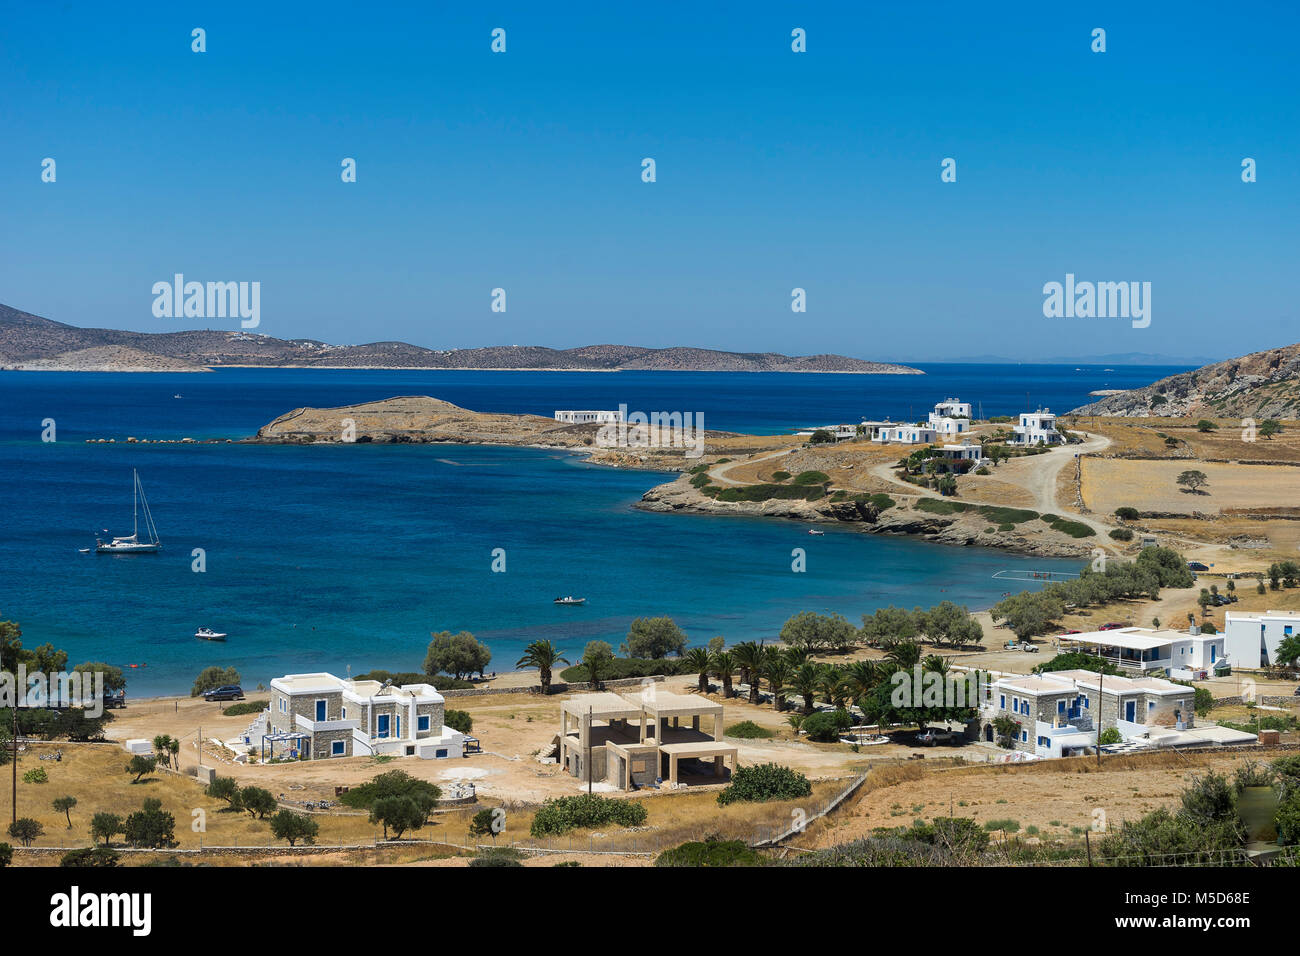 Schinoussa Island High Resolution Stock Photography and Images - Alamy